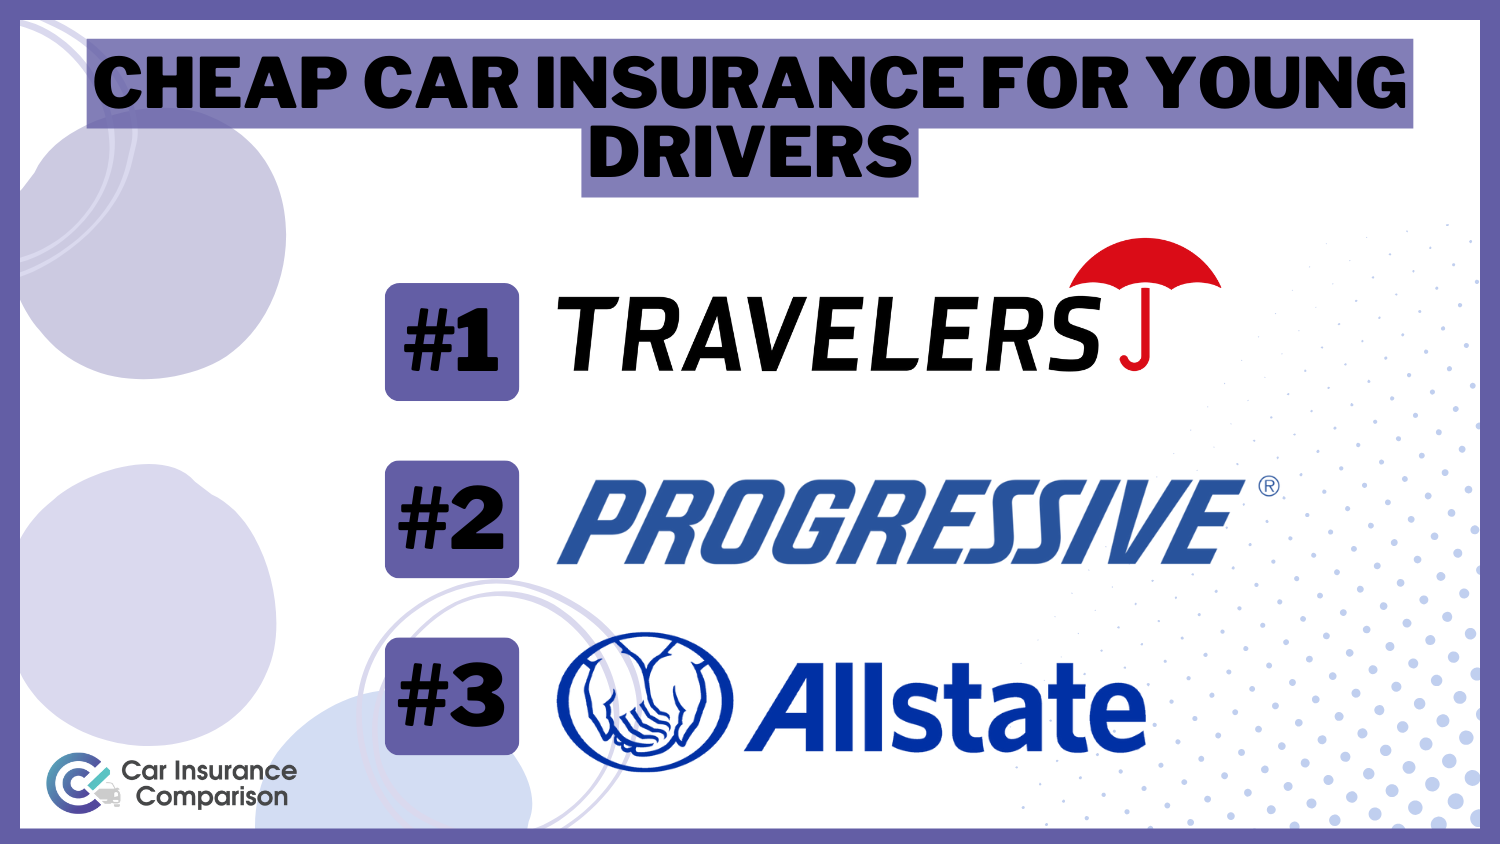 Cheap Car Insurance for Young Drivers: Travelers, Progressive, Allstate